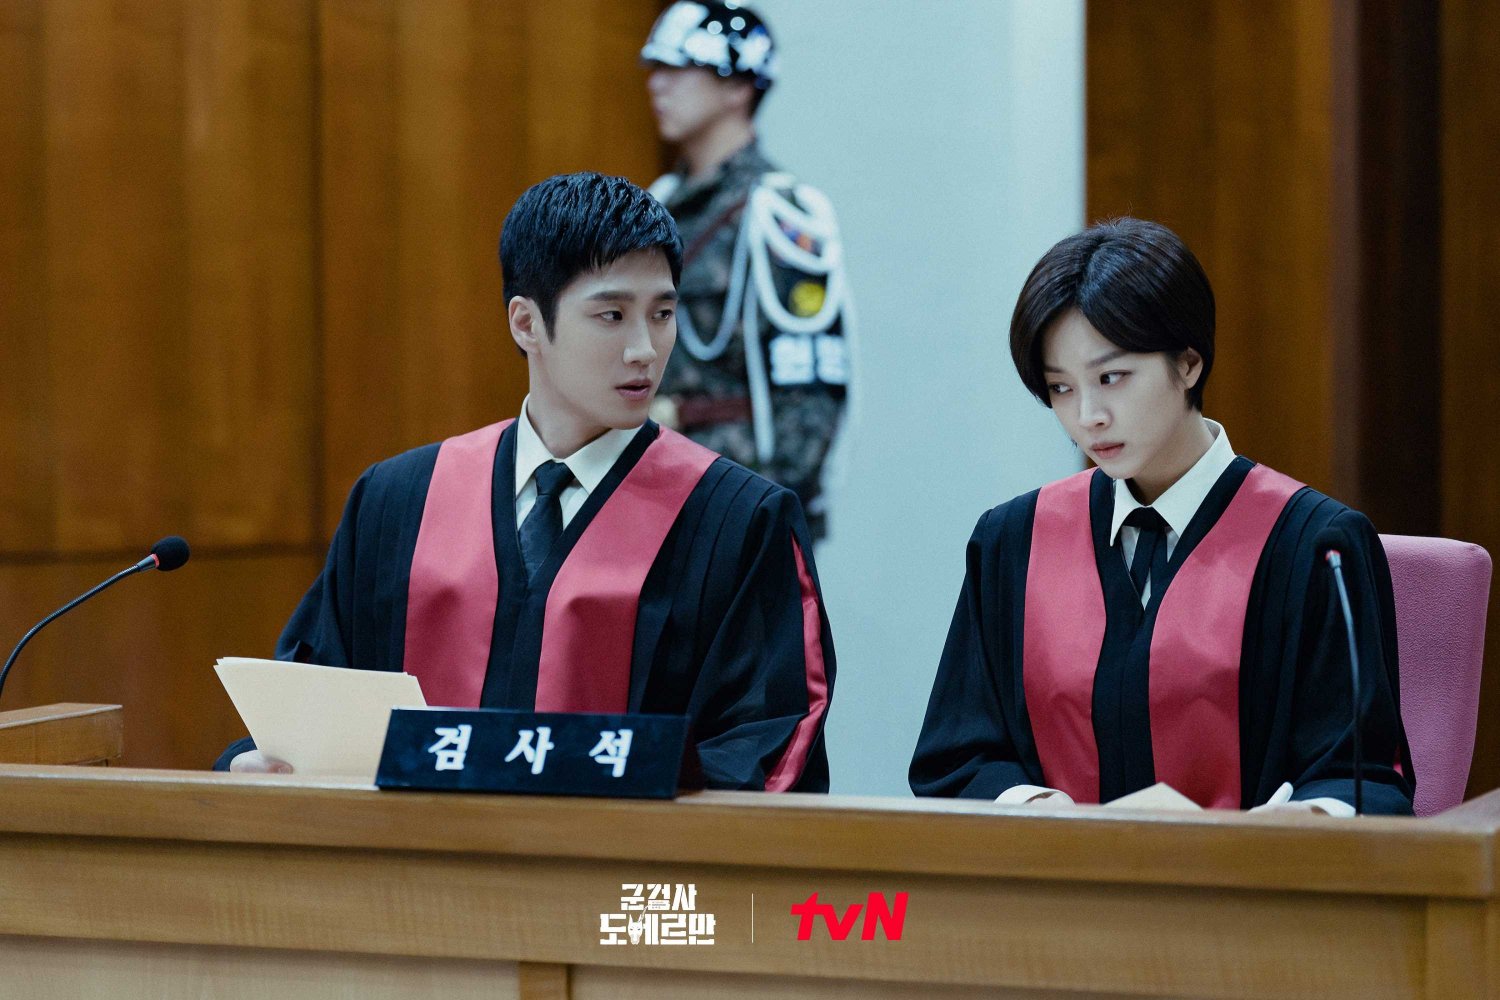 [Photos] New Stills and Behind the Scenes Images Added for the Korean ...